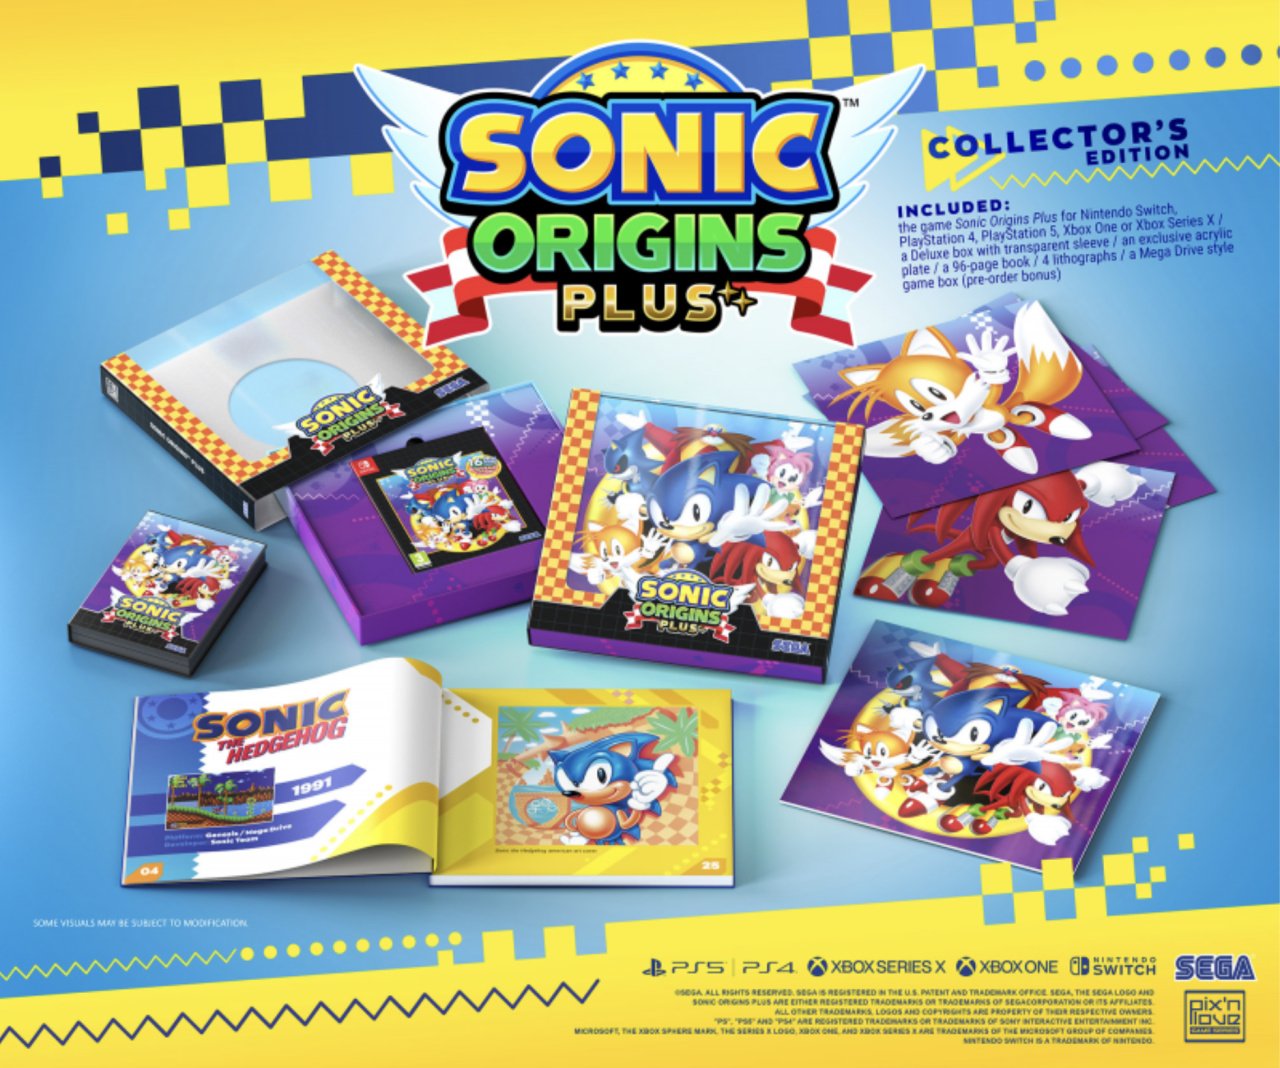 Sonic Origins deserves a Physical Release, so I just made one